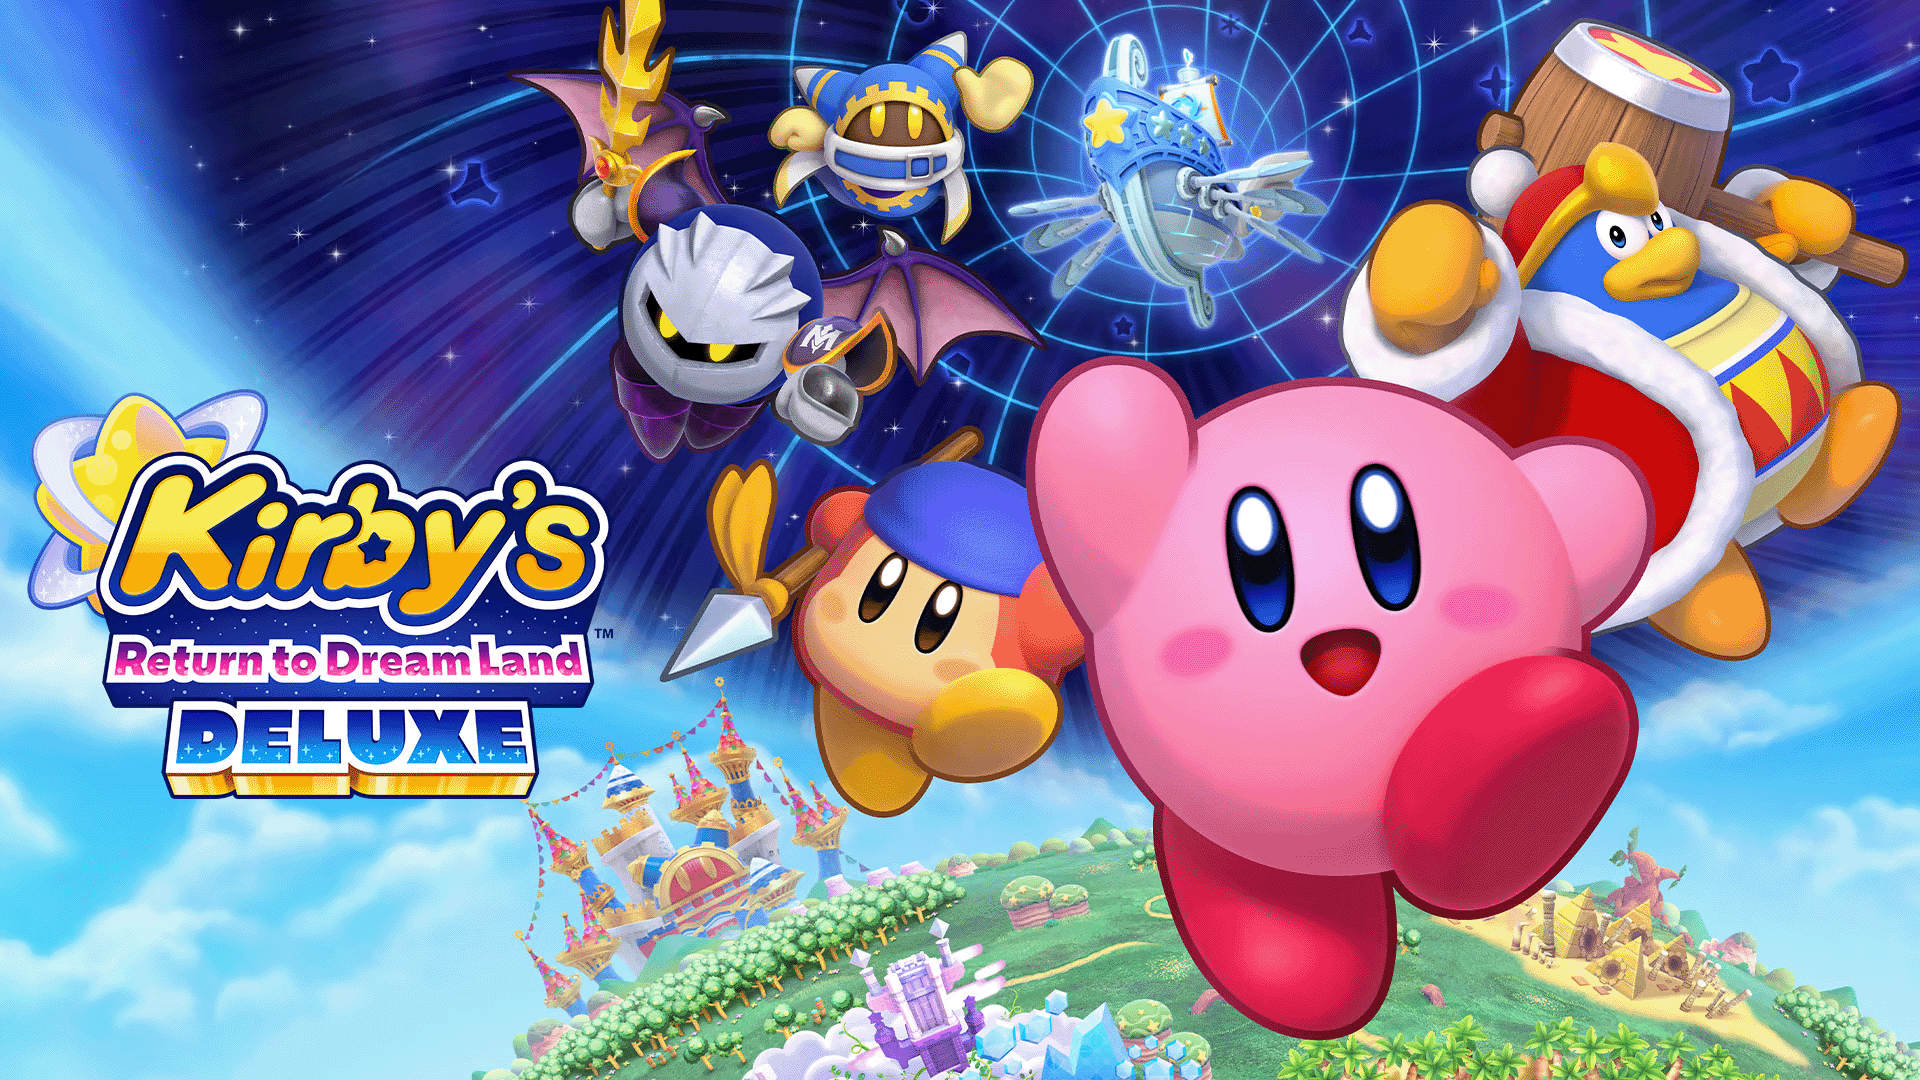 Why Kirby and The Forgotten Land will be a huge success